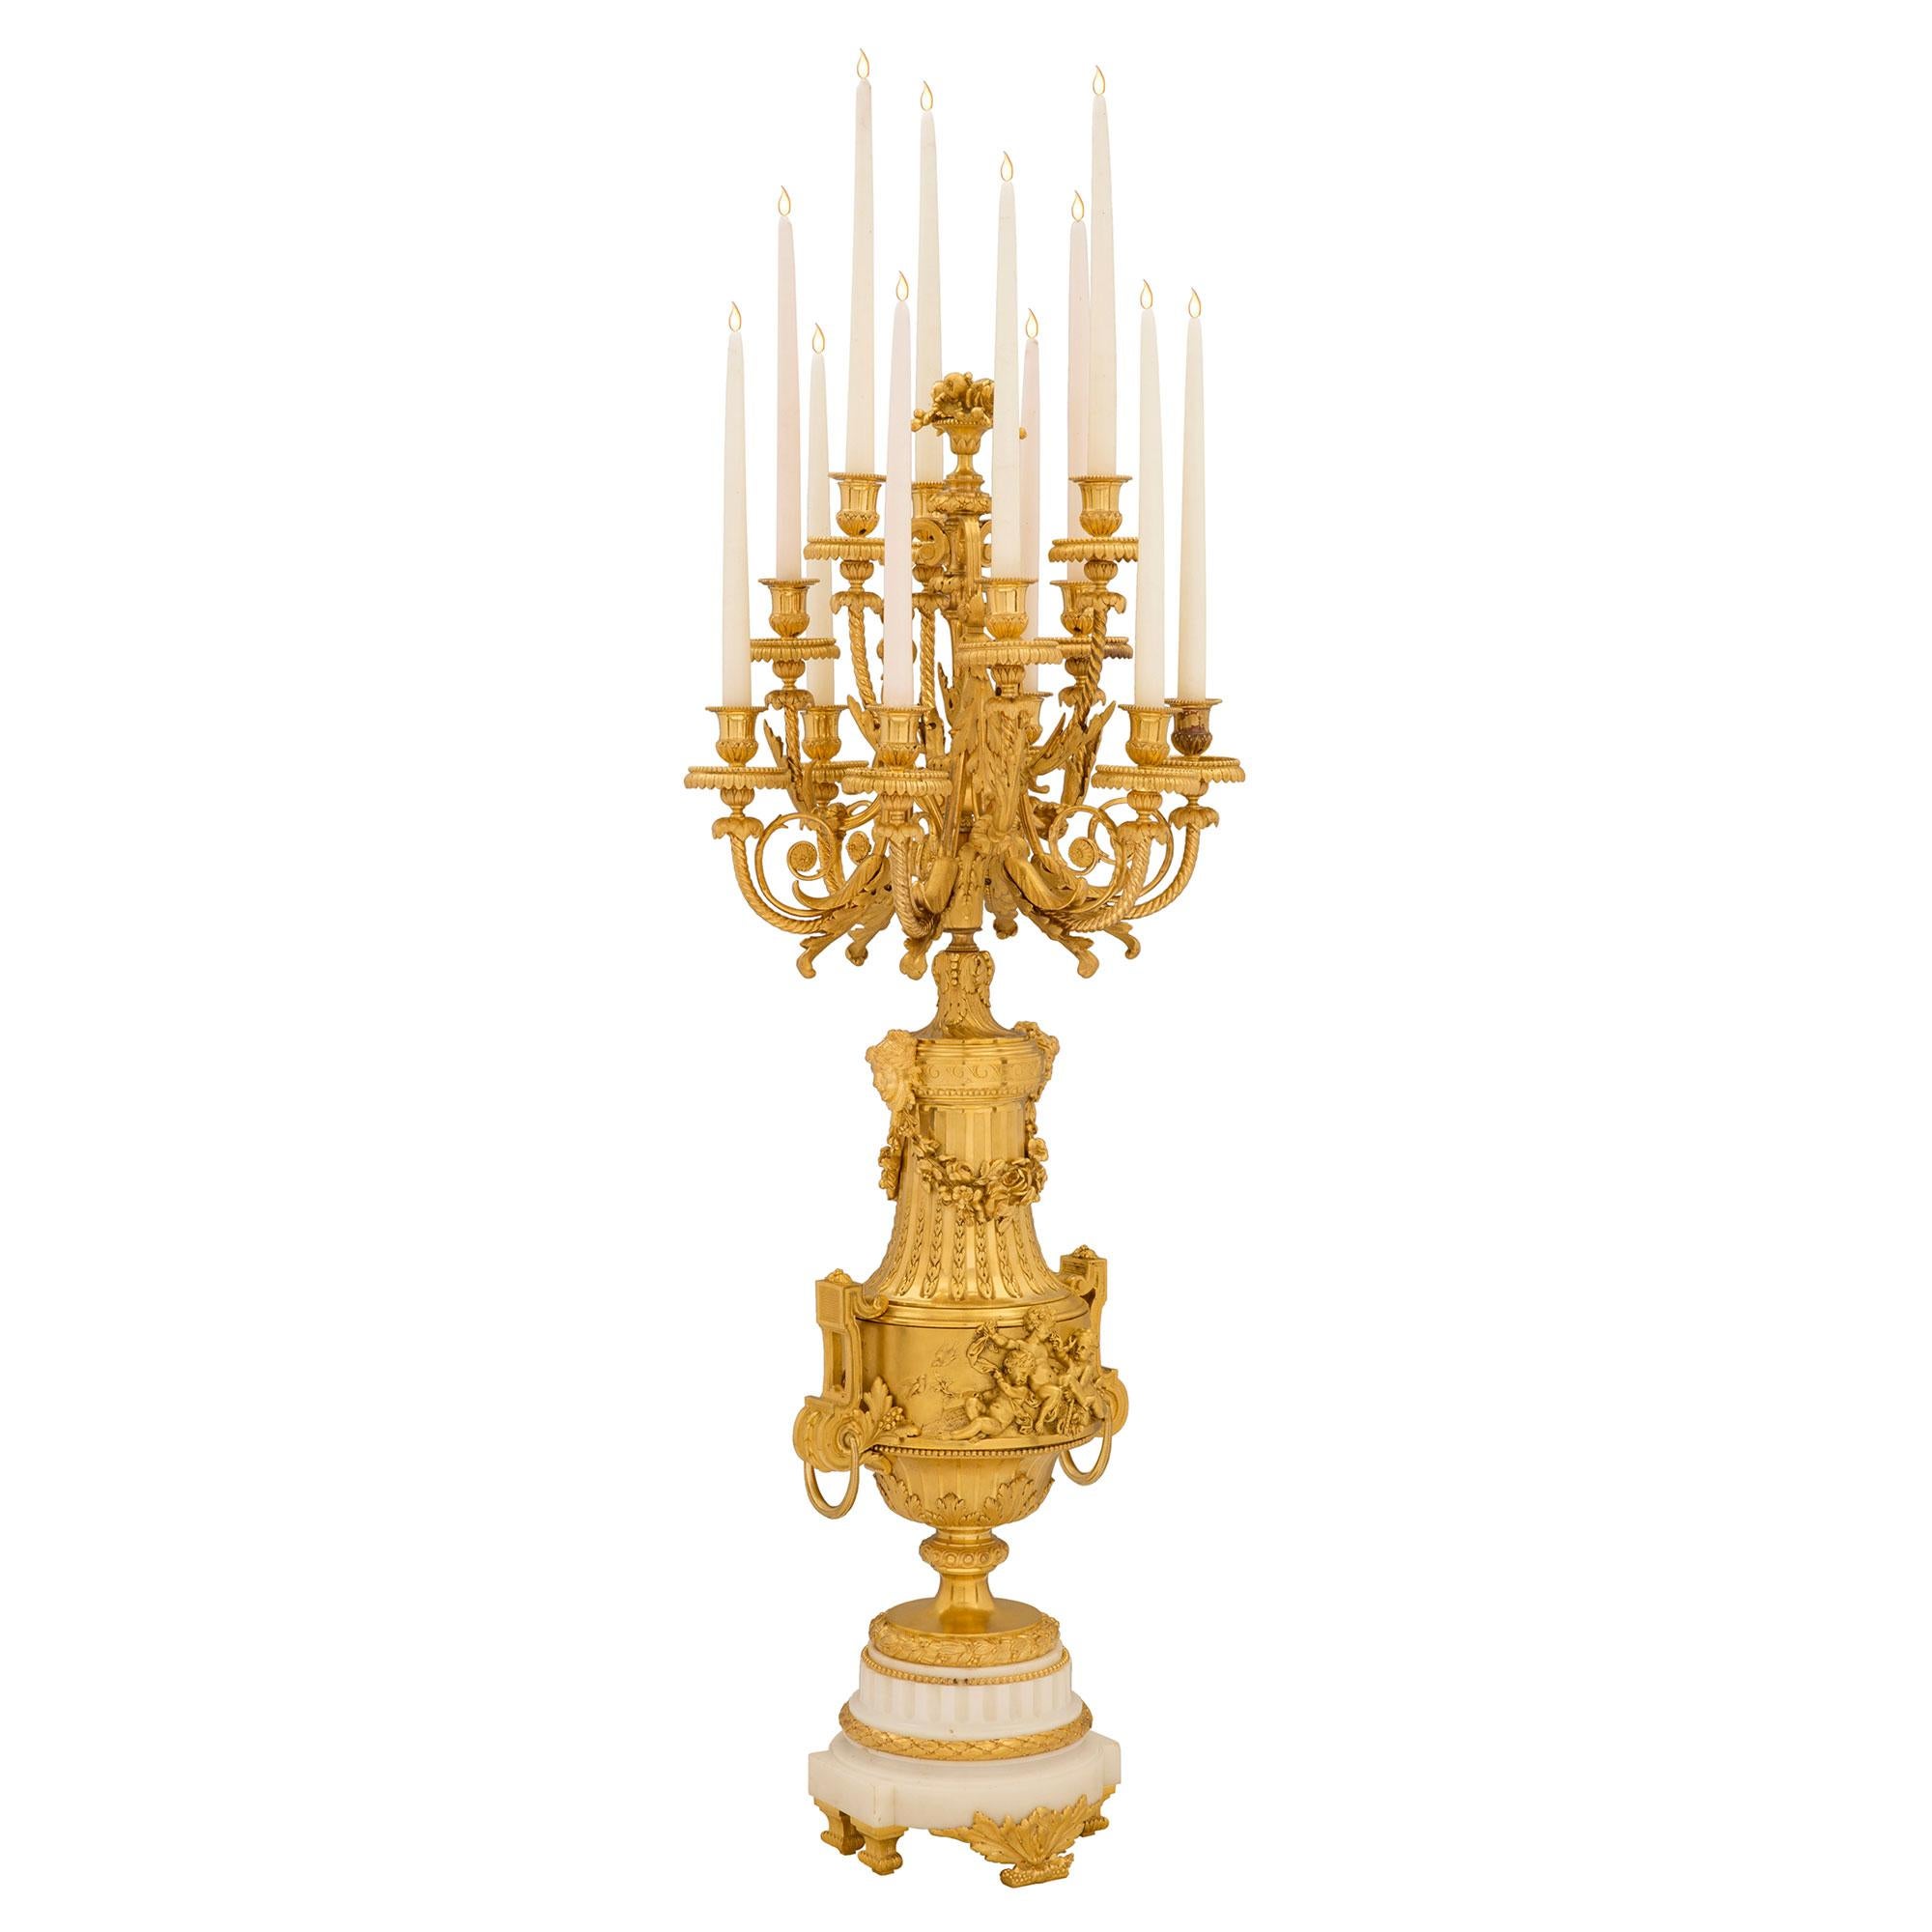 A stunning and extremely high quality pair of French 19th century ormolu and white Carrara marble candelabras. Each monumentally scaled candelabra is raised by elegant foliate feet and a white Carrara marble support. The supports display fine fluted